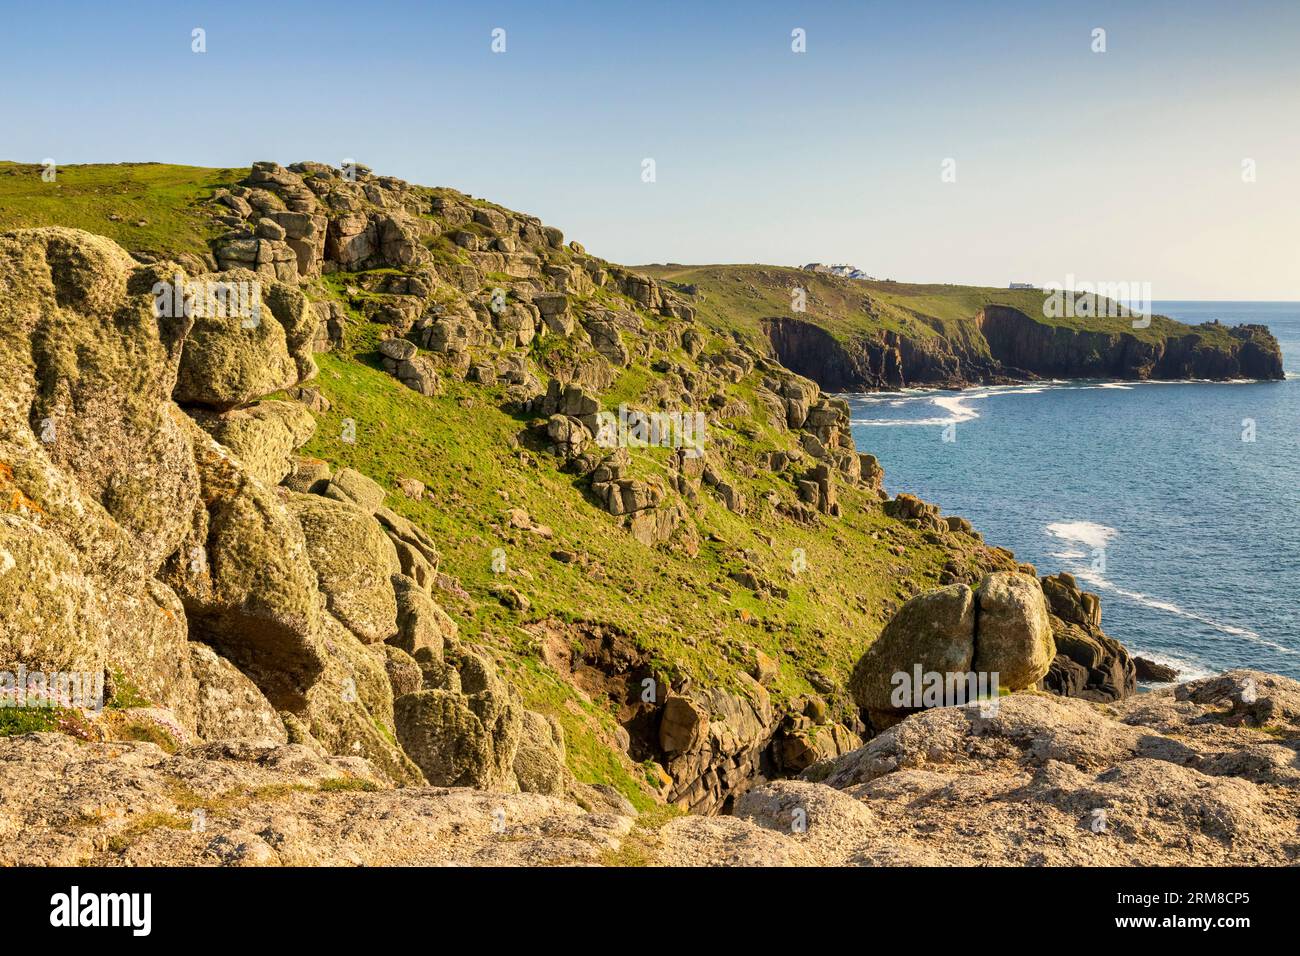 A view of the Cornish coast between Sennen Cove and Land's End, from the South West Coast Path. Stock Photo